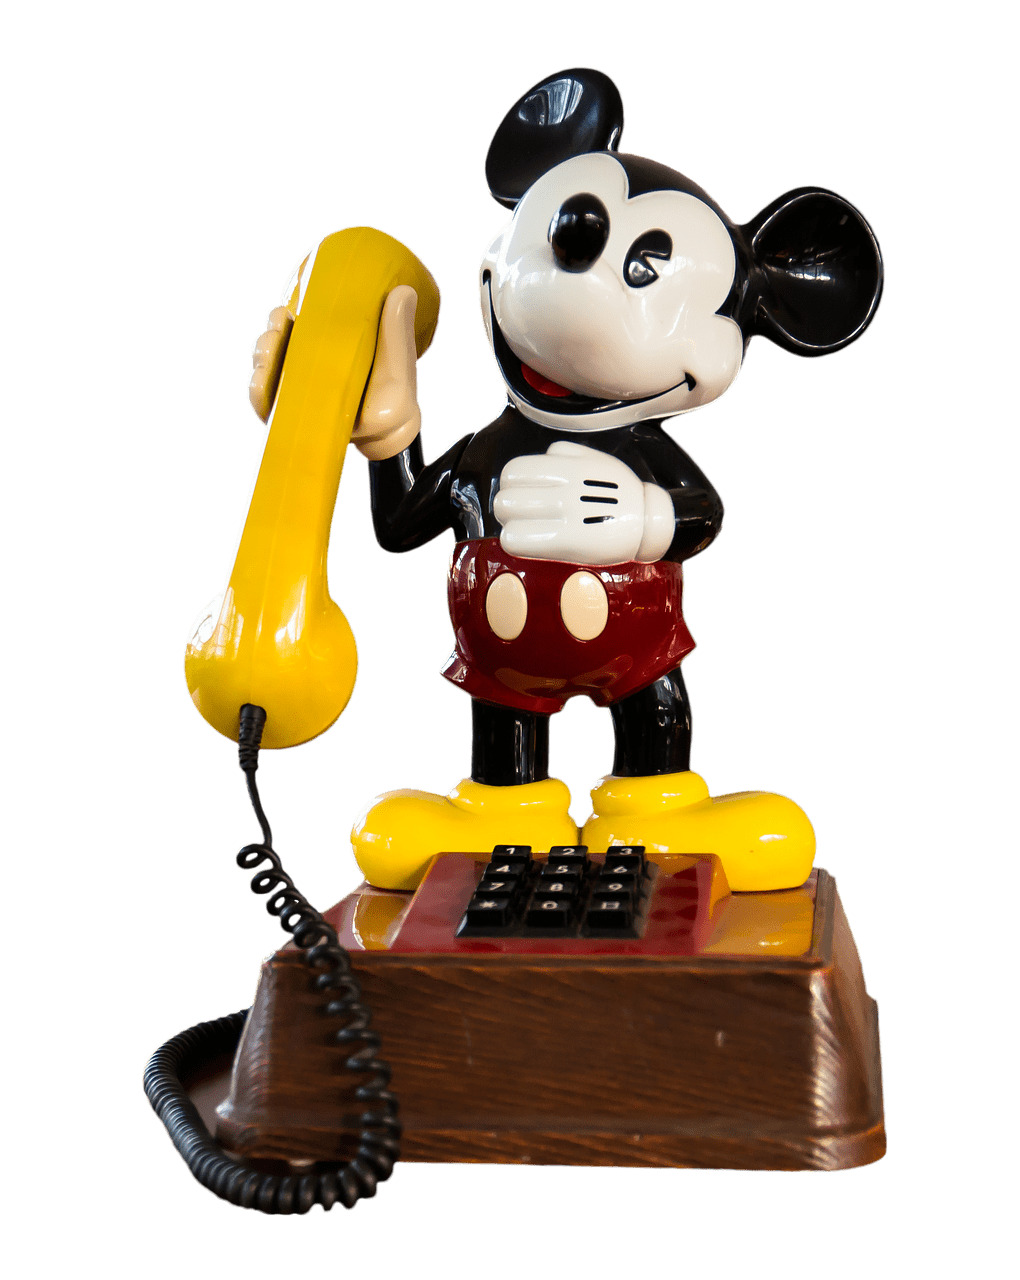 Vintage Mickey Mouse Telephone icons